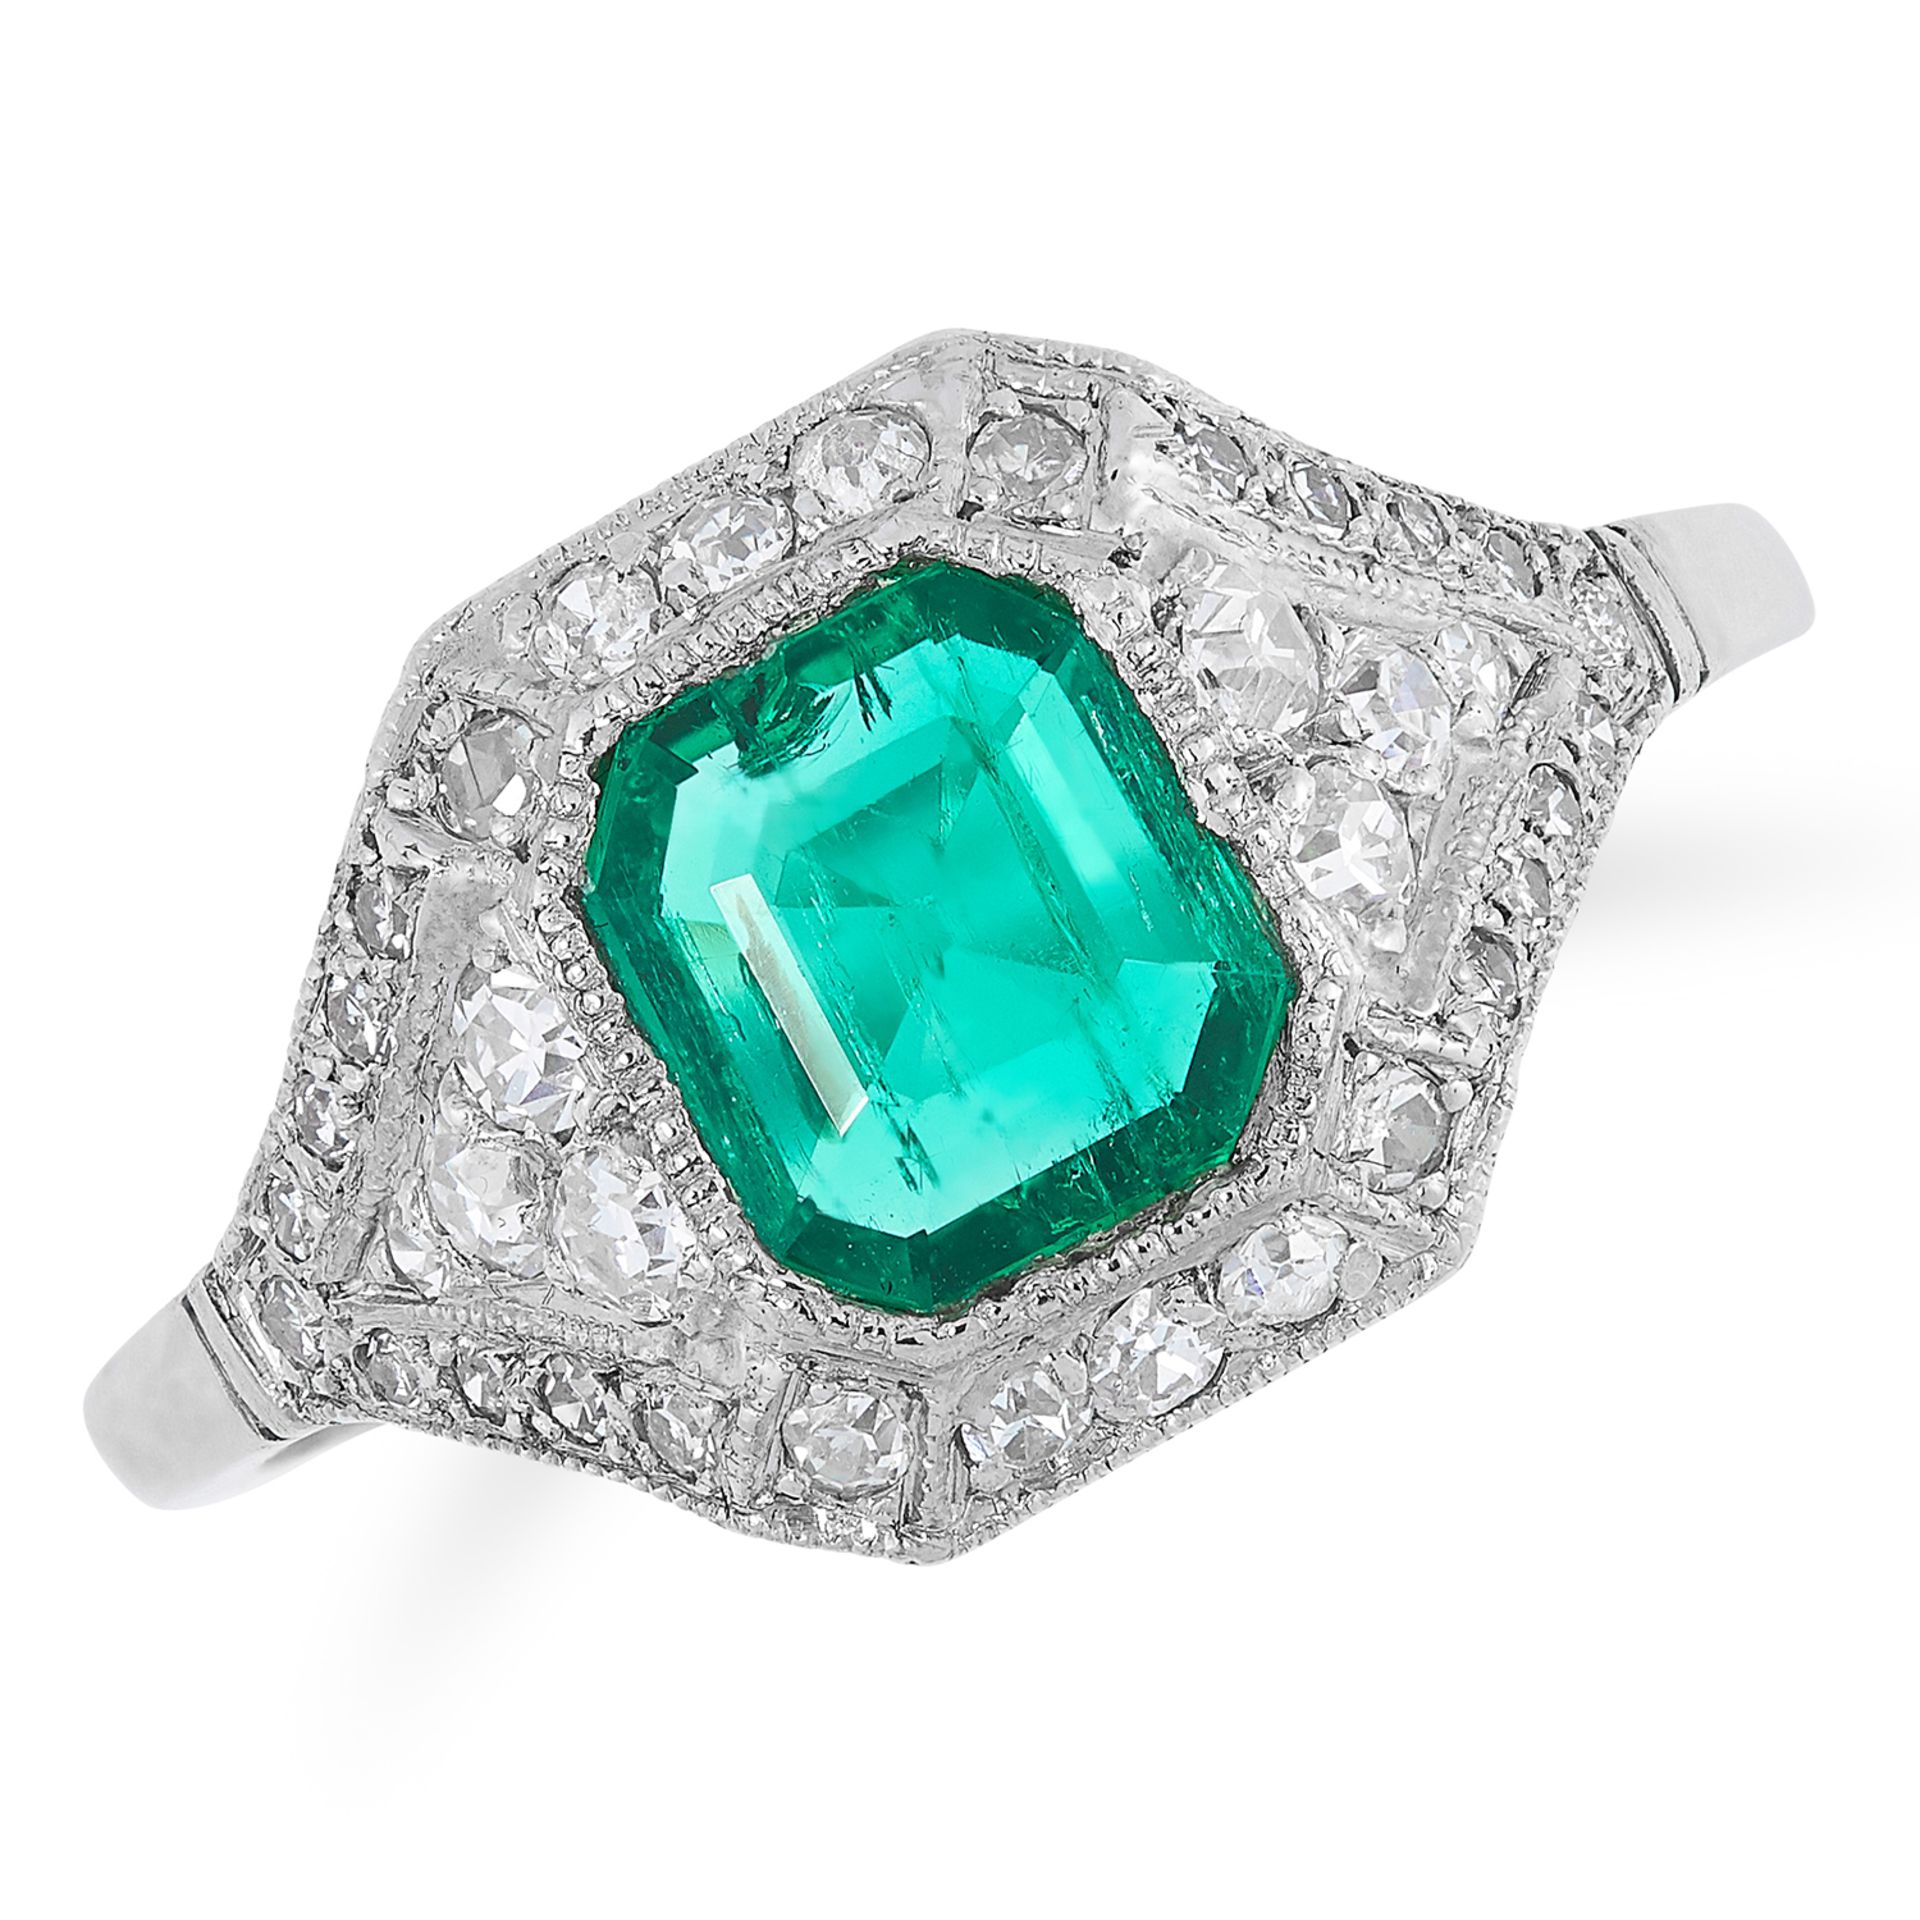 AN EMERALD AND DIAMOND DRESS RING set with an emerald cut emerald of approximately 1.0 carats,